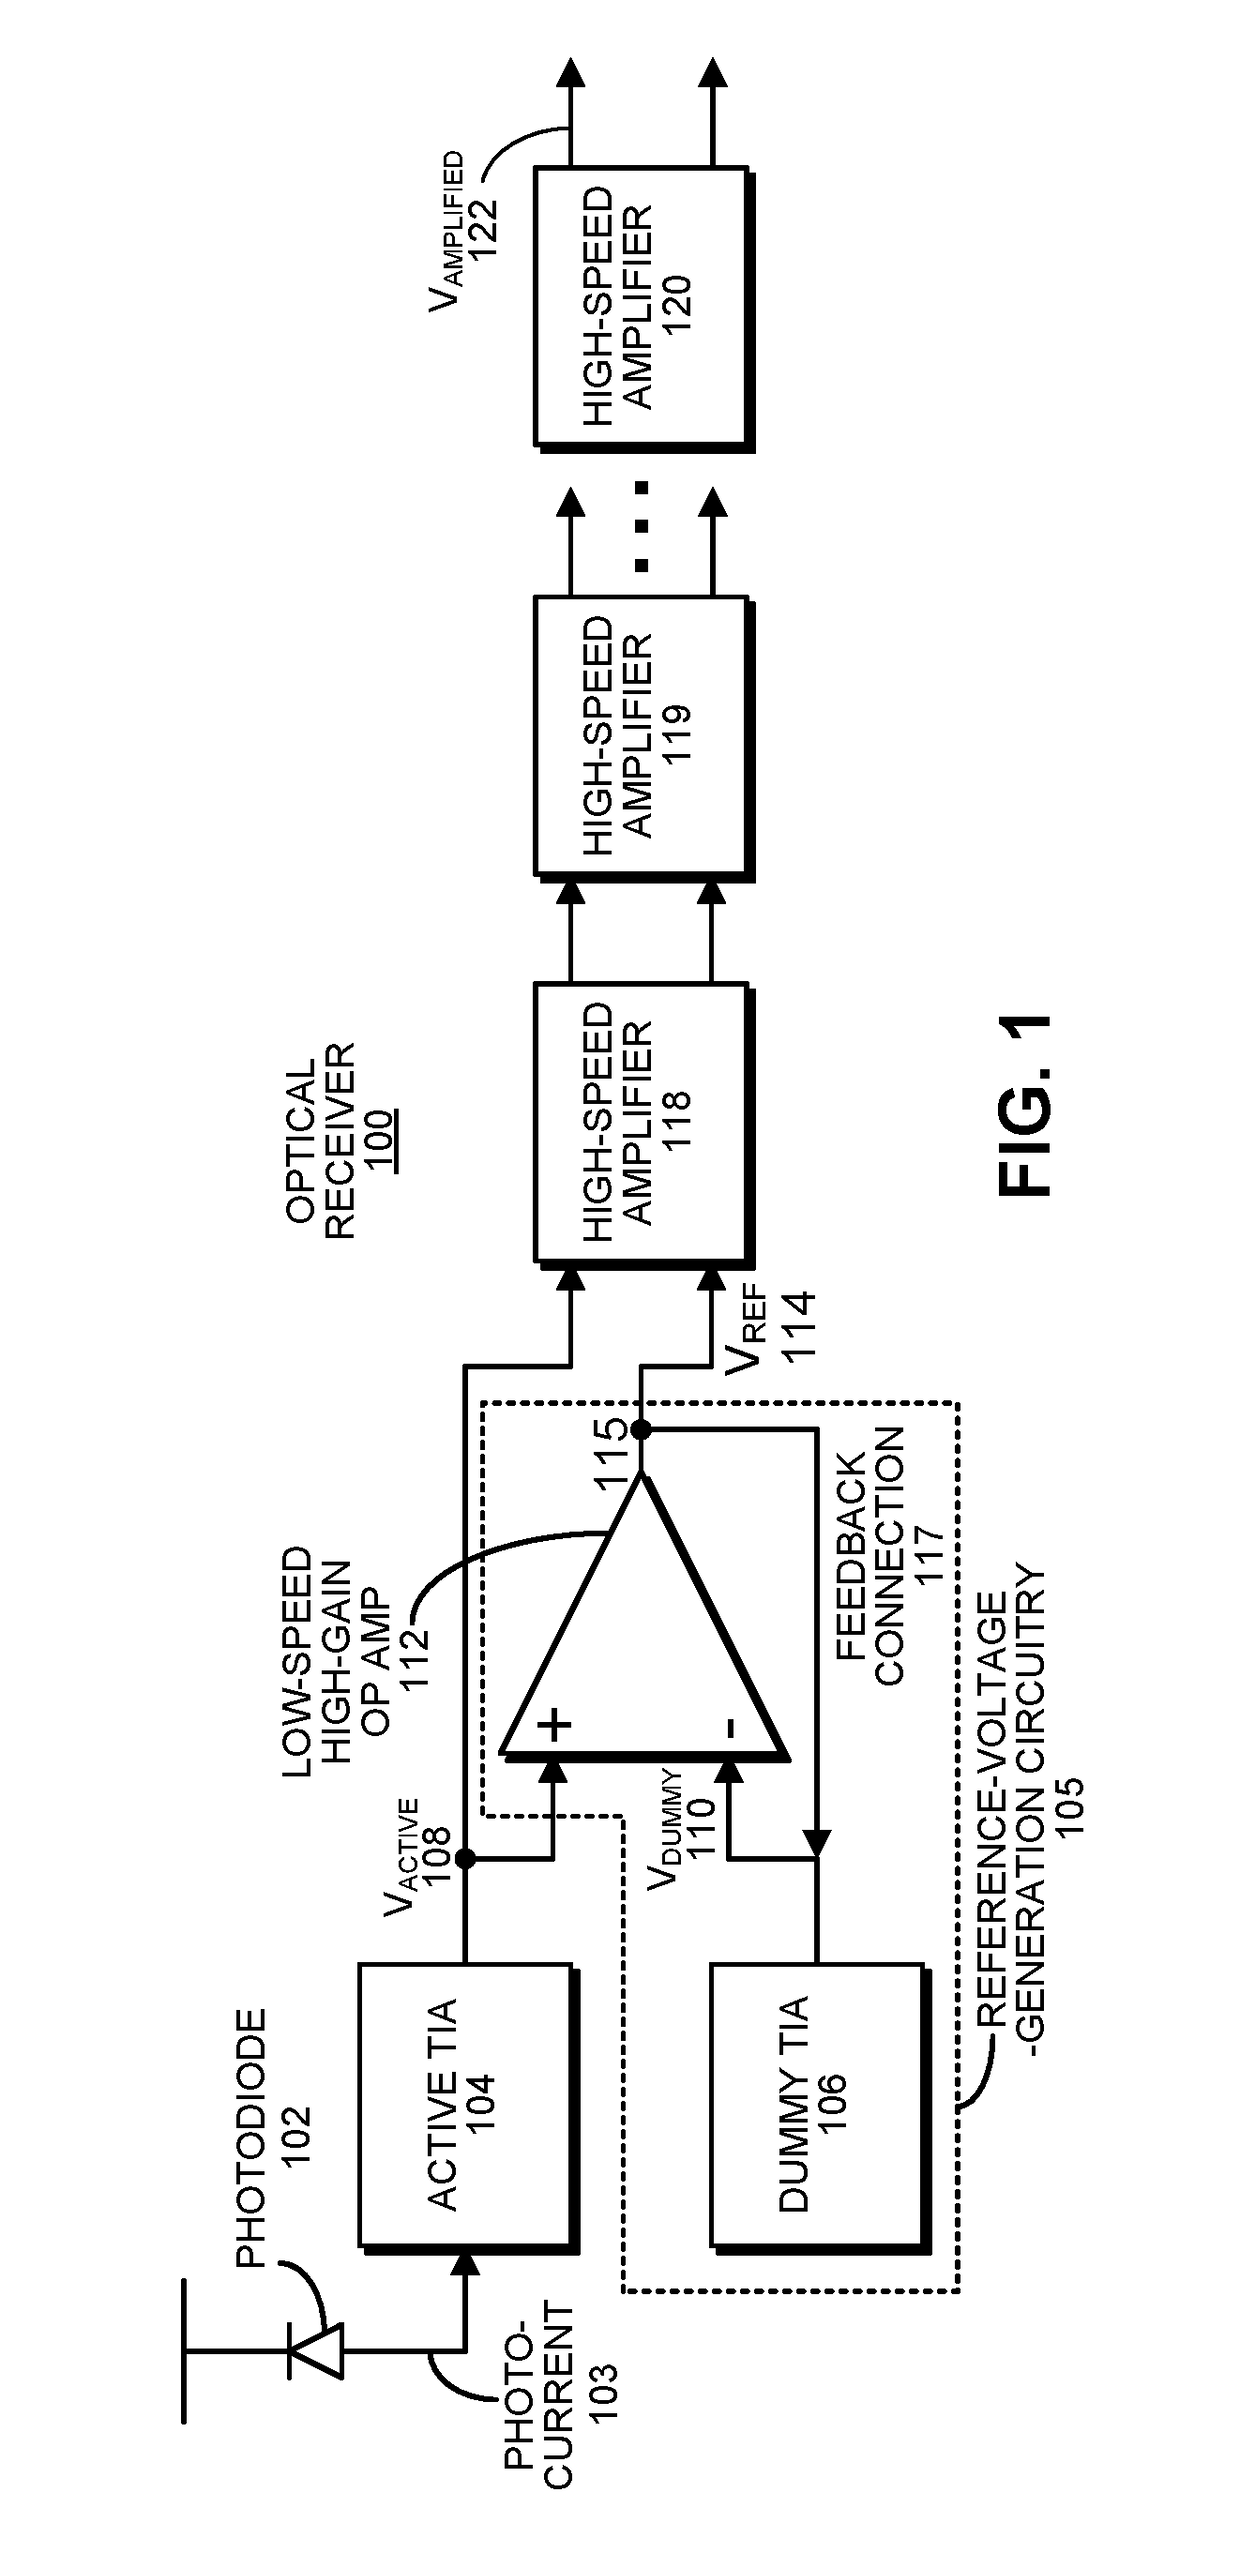 Extracting an embedded DC signal to provide a reference voltage for an optical receiver